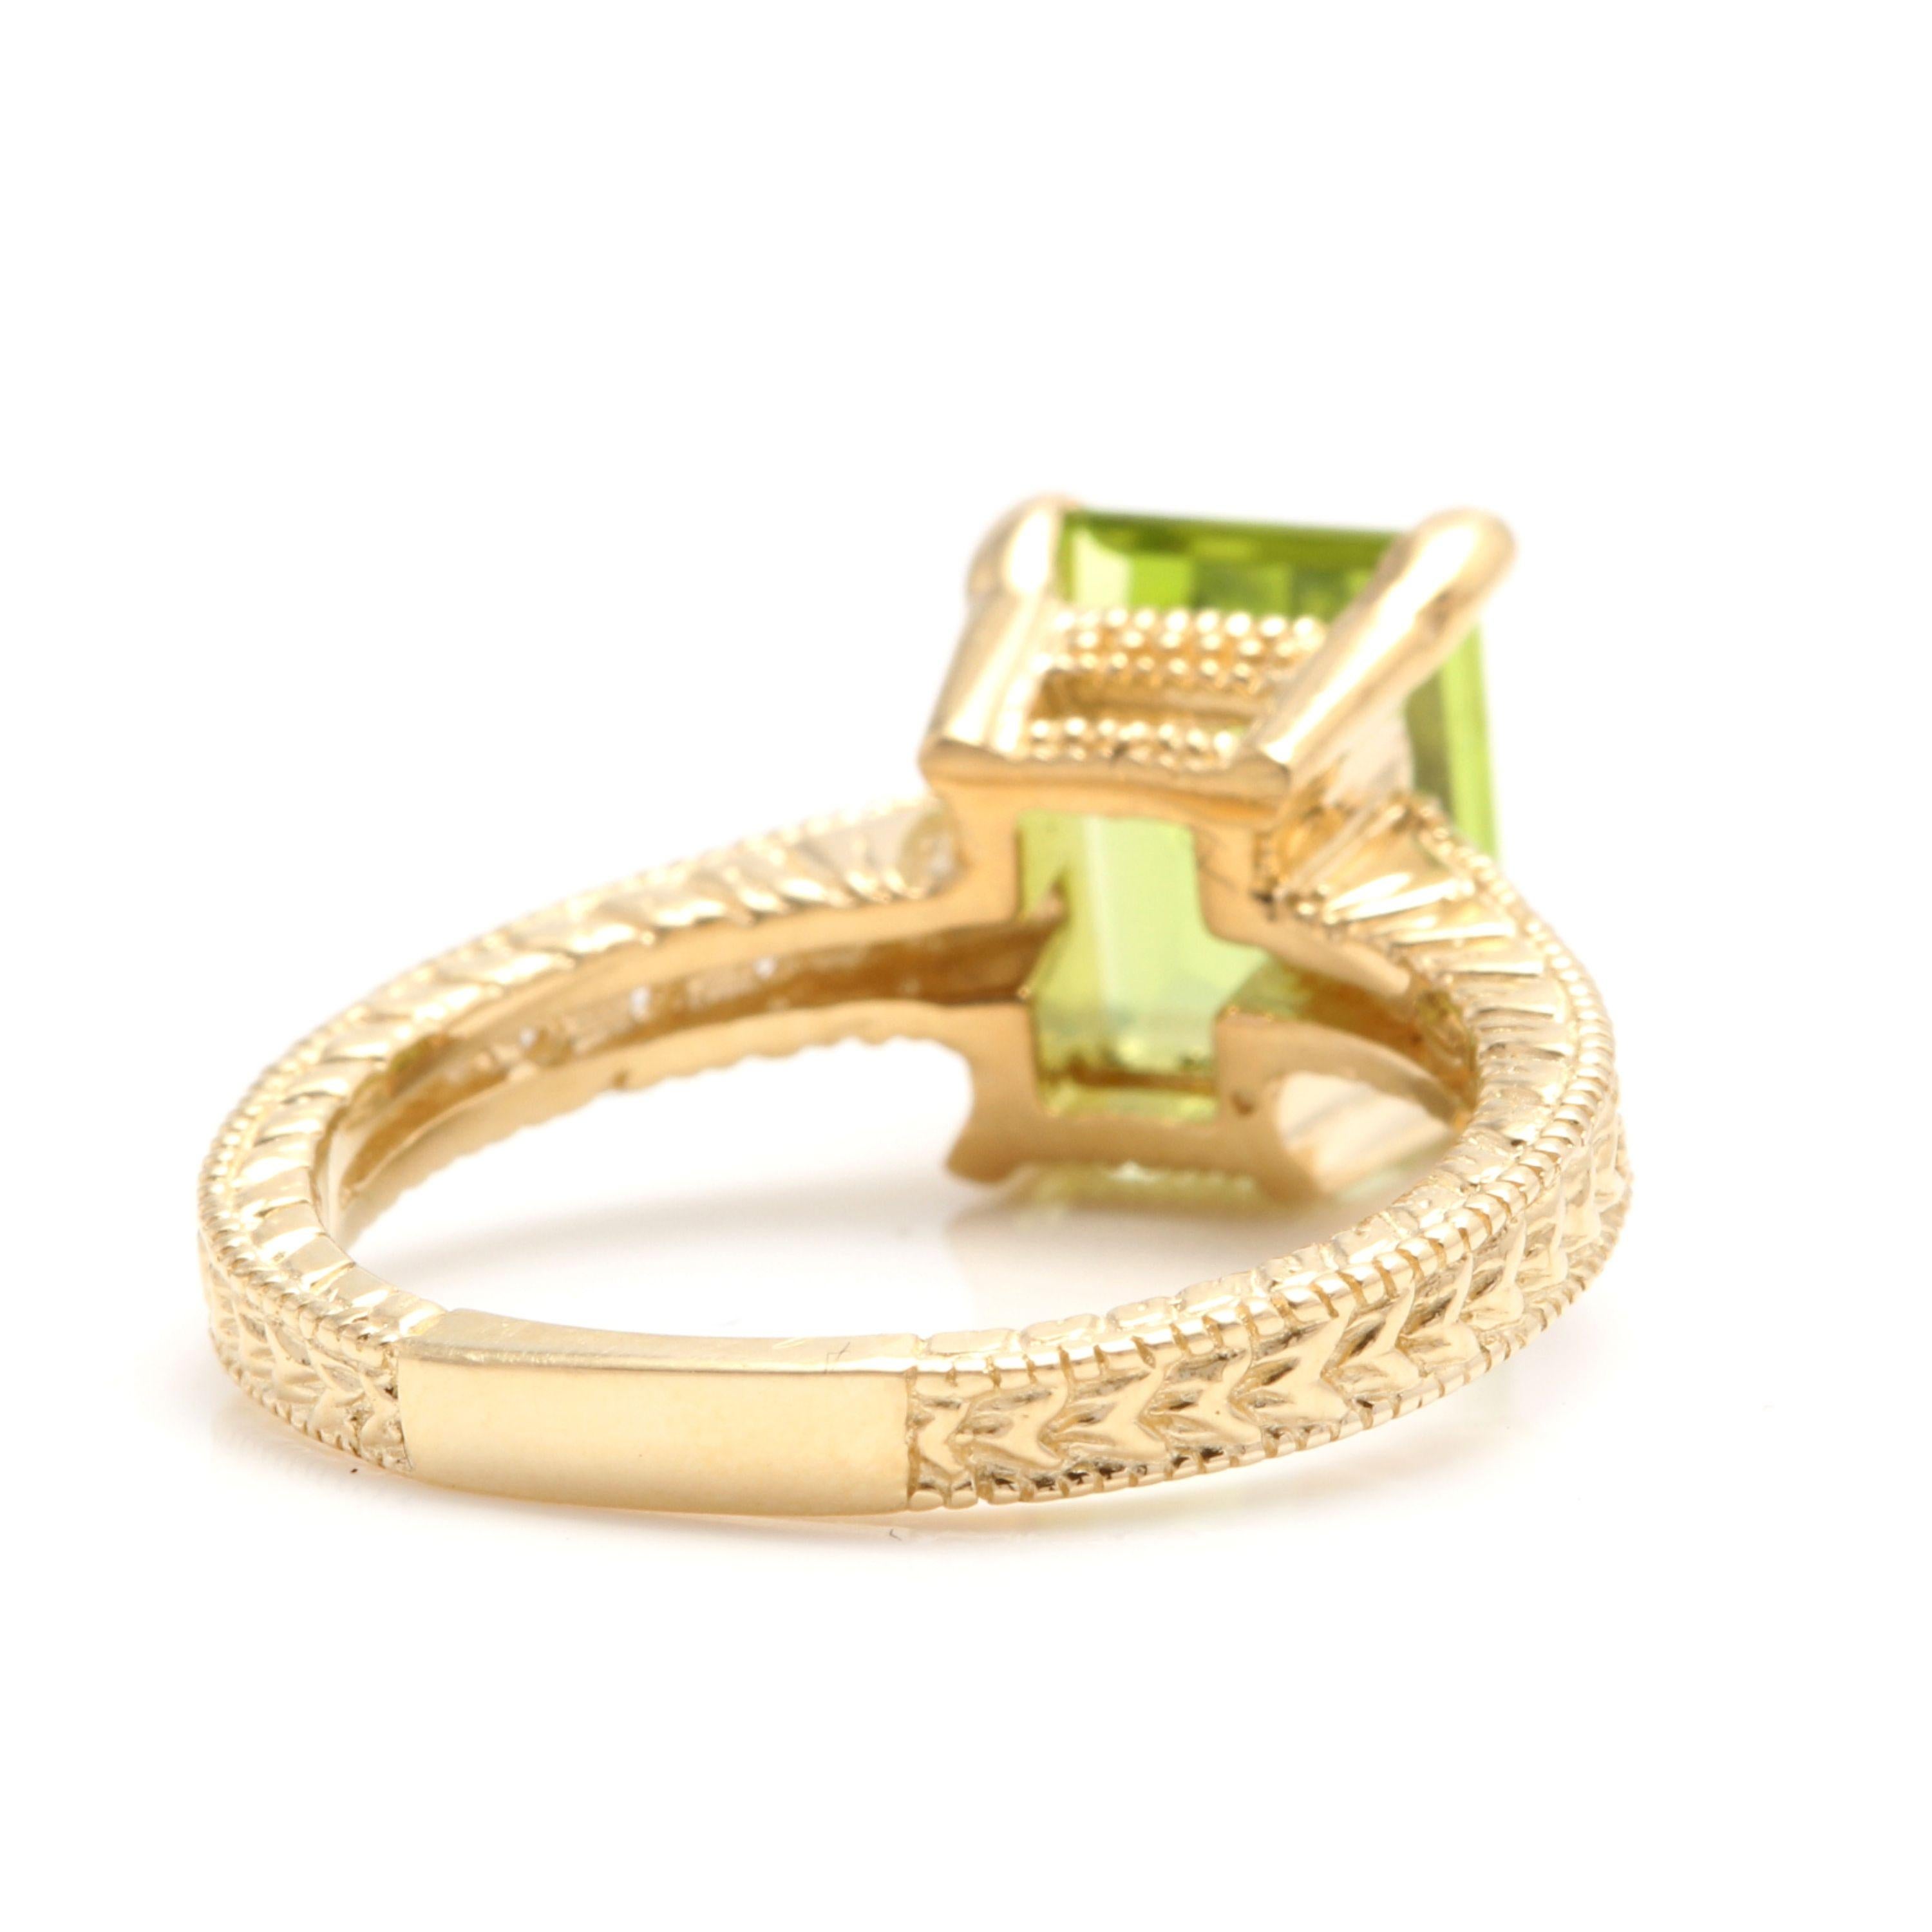 3.20 Carat Impressive Natural Peridot and Diamond 14 Karat Yellow Gold Ring In New Condition For Sale In Los Angeles, CA